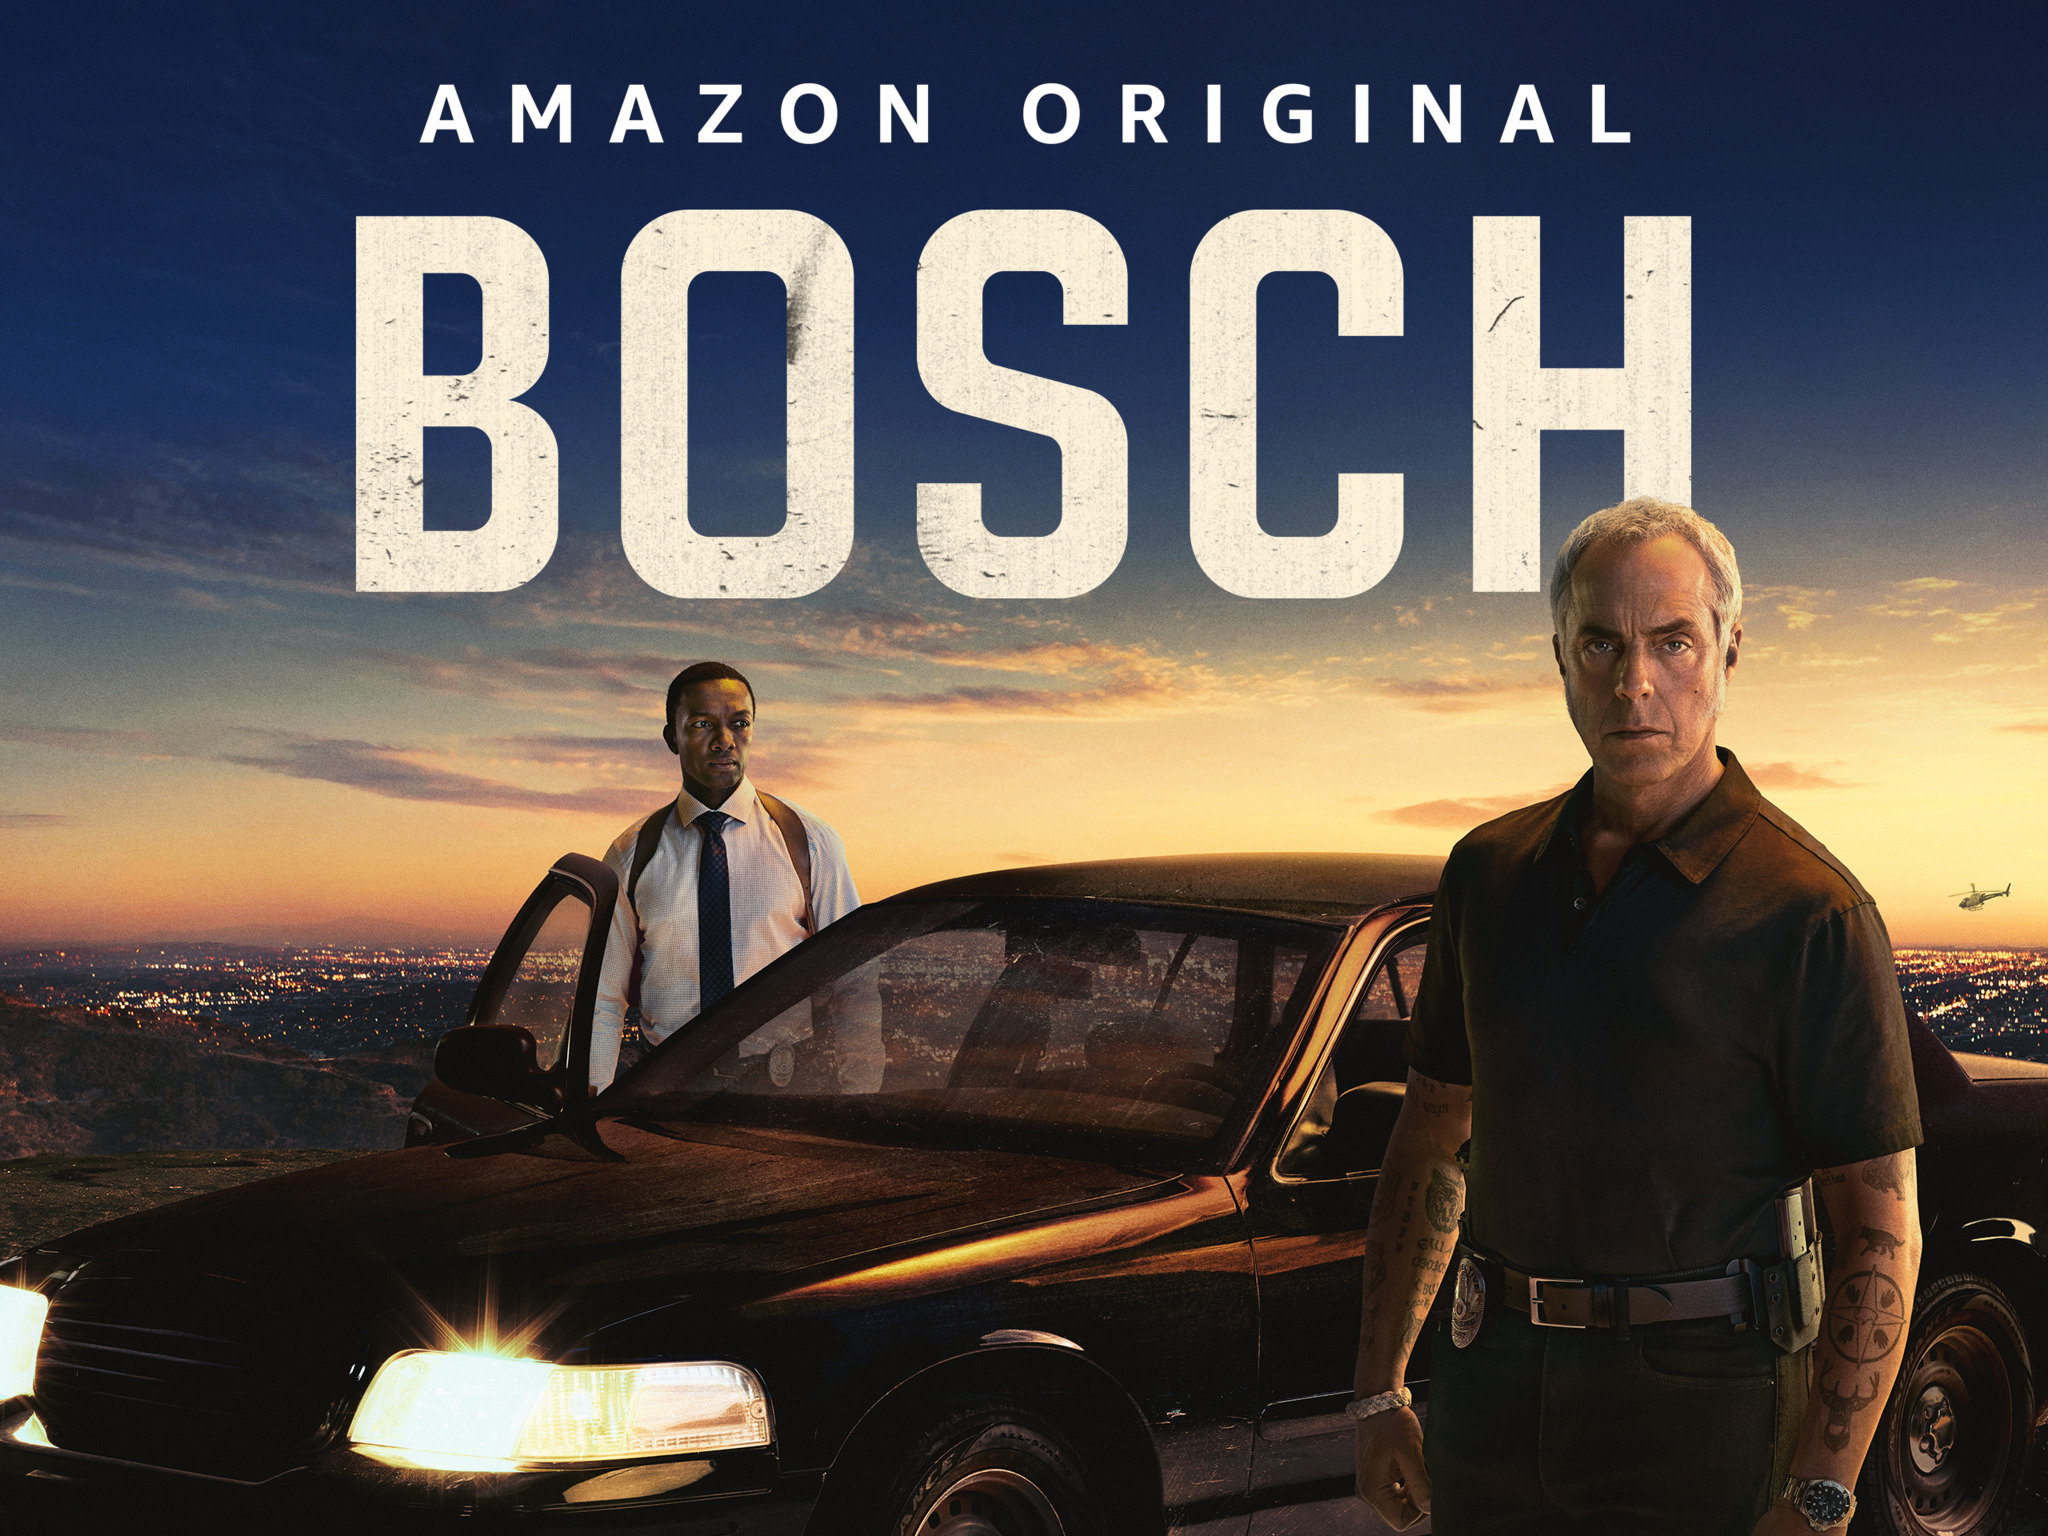 Poster of the show, showing detective Bosch and his aide, Jerry, beside a car in the LA desert